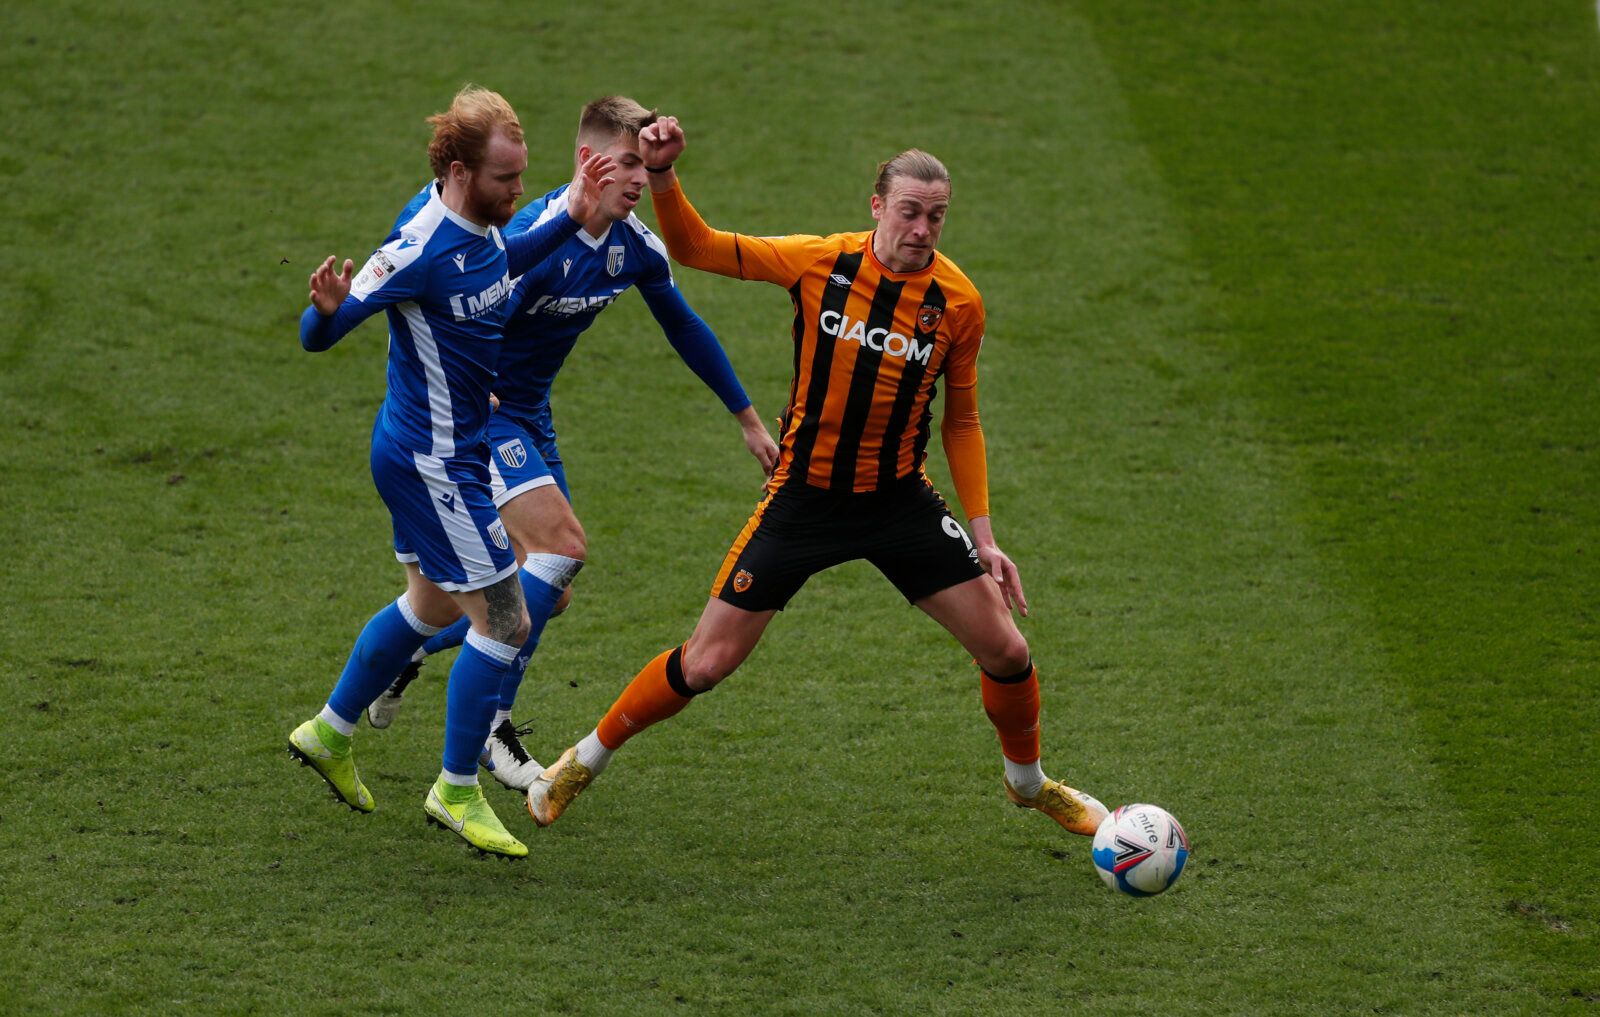 Soccer Football - League One - Hull City v Gillingham - KCOM Stadium, Hull, Britain - March 27, 2021 Hull City's  Tom Eaves in action with Gillinham's Connor Ogilvie Action Images/Lee Smith EDITORIAL USE ONLY. No use with unauthorized audio, video, data, fixture lists, club/league logos or 'live' services. Online in-match use limited to 75 images, no video emulation. No use in betting, games or single club /league/player publications.  Please contact your account representative for further detai